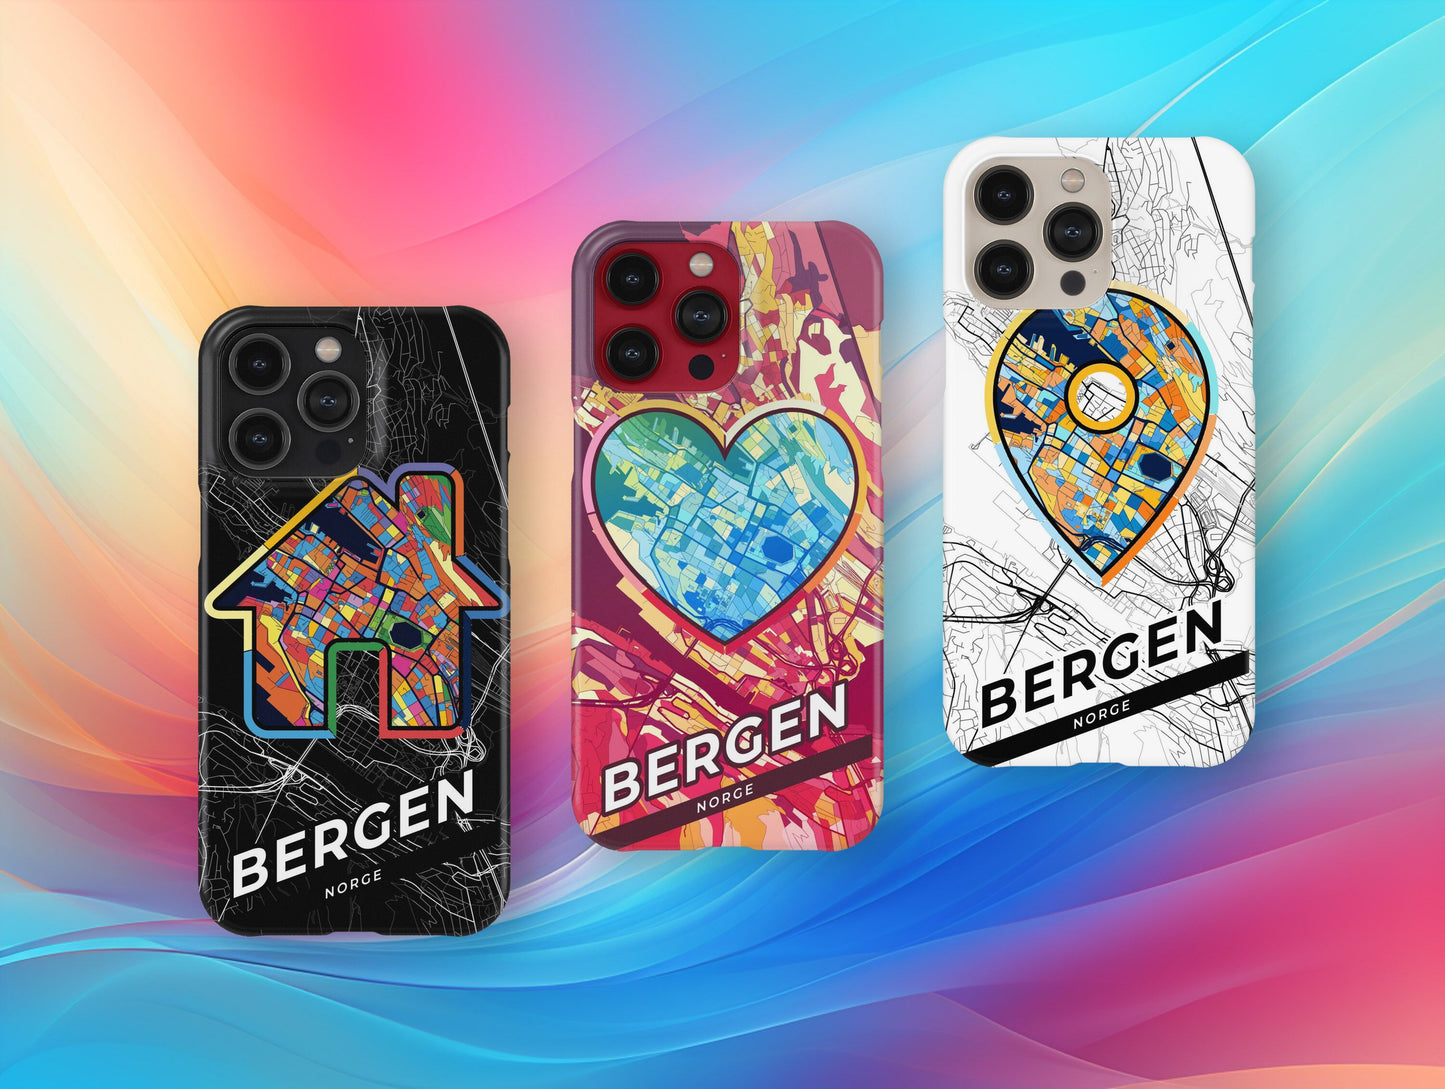 Bergen Norway slim phone case with colorful icon. Birthday, wedding or housewarming gift. Couple match cases.